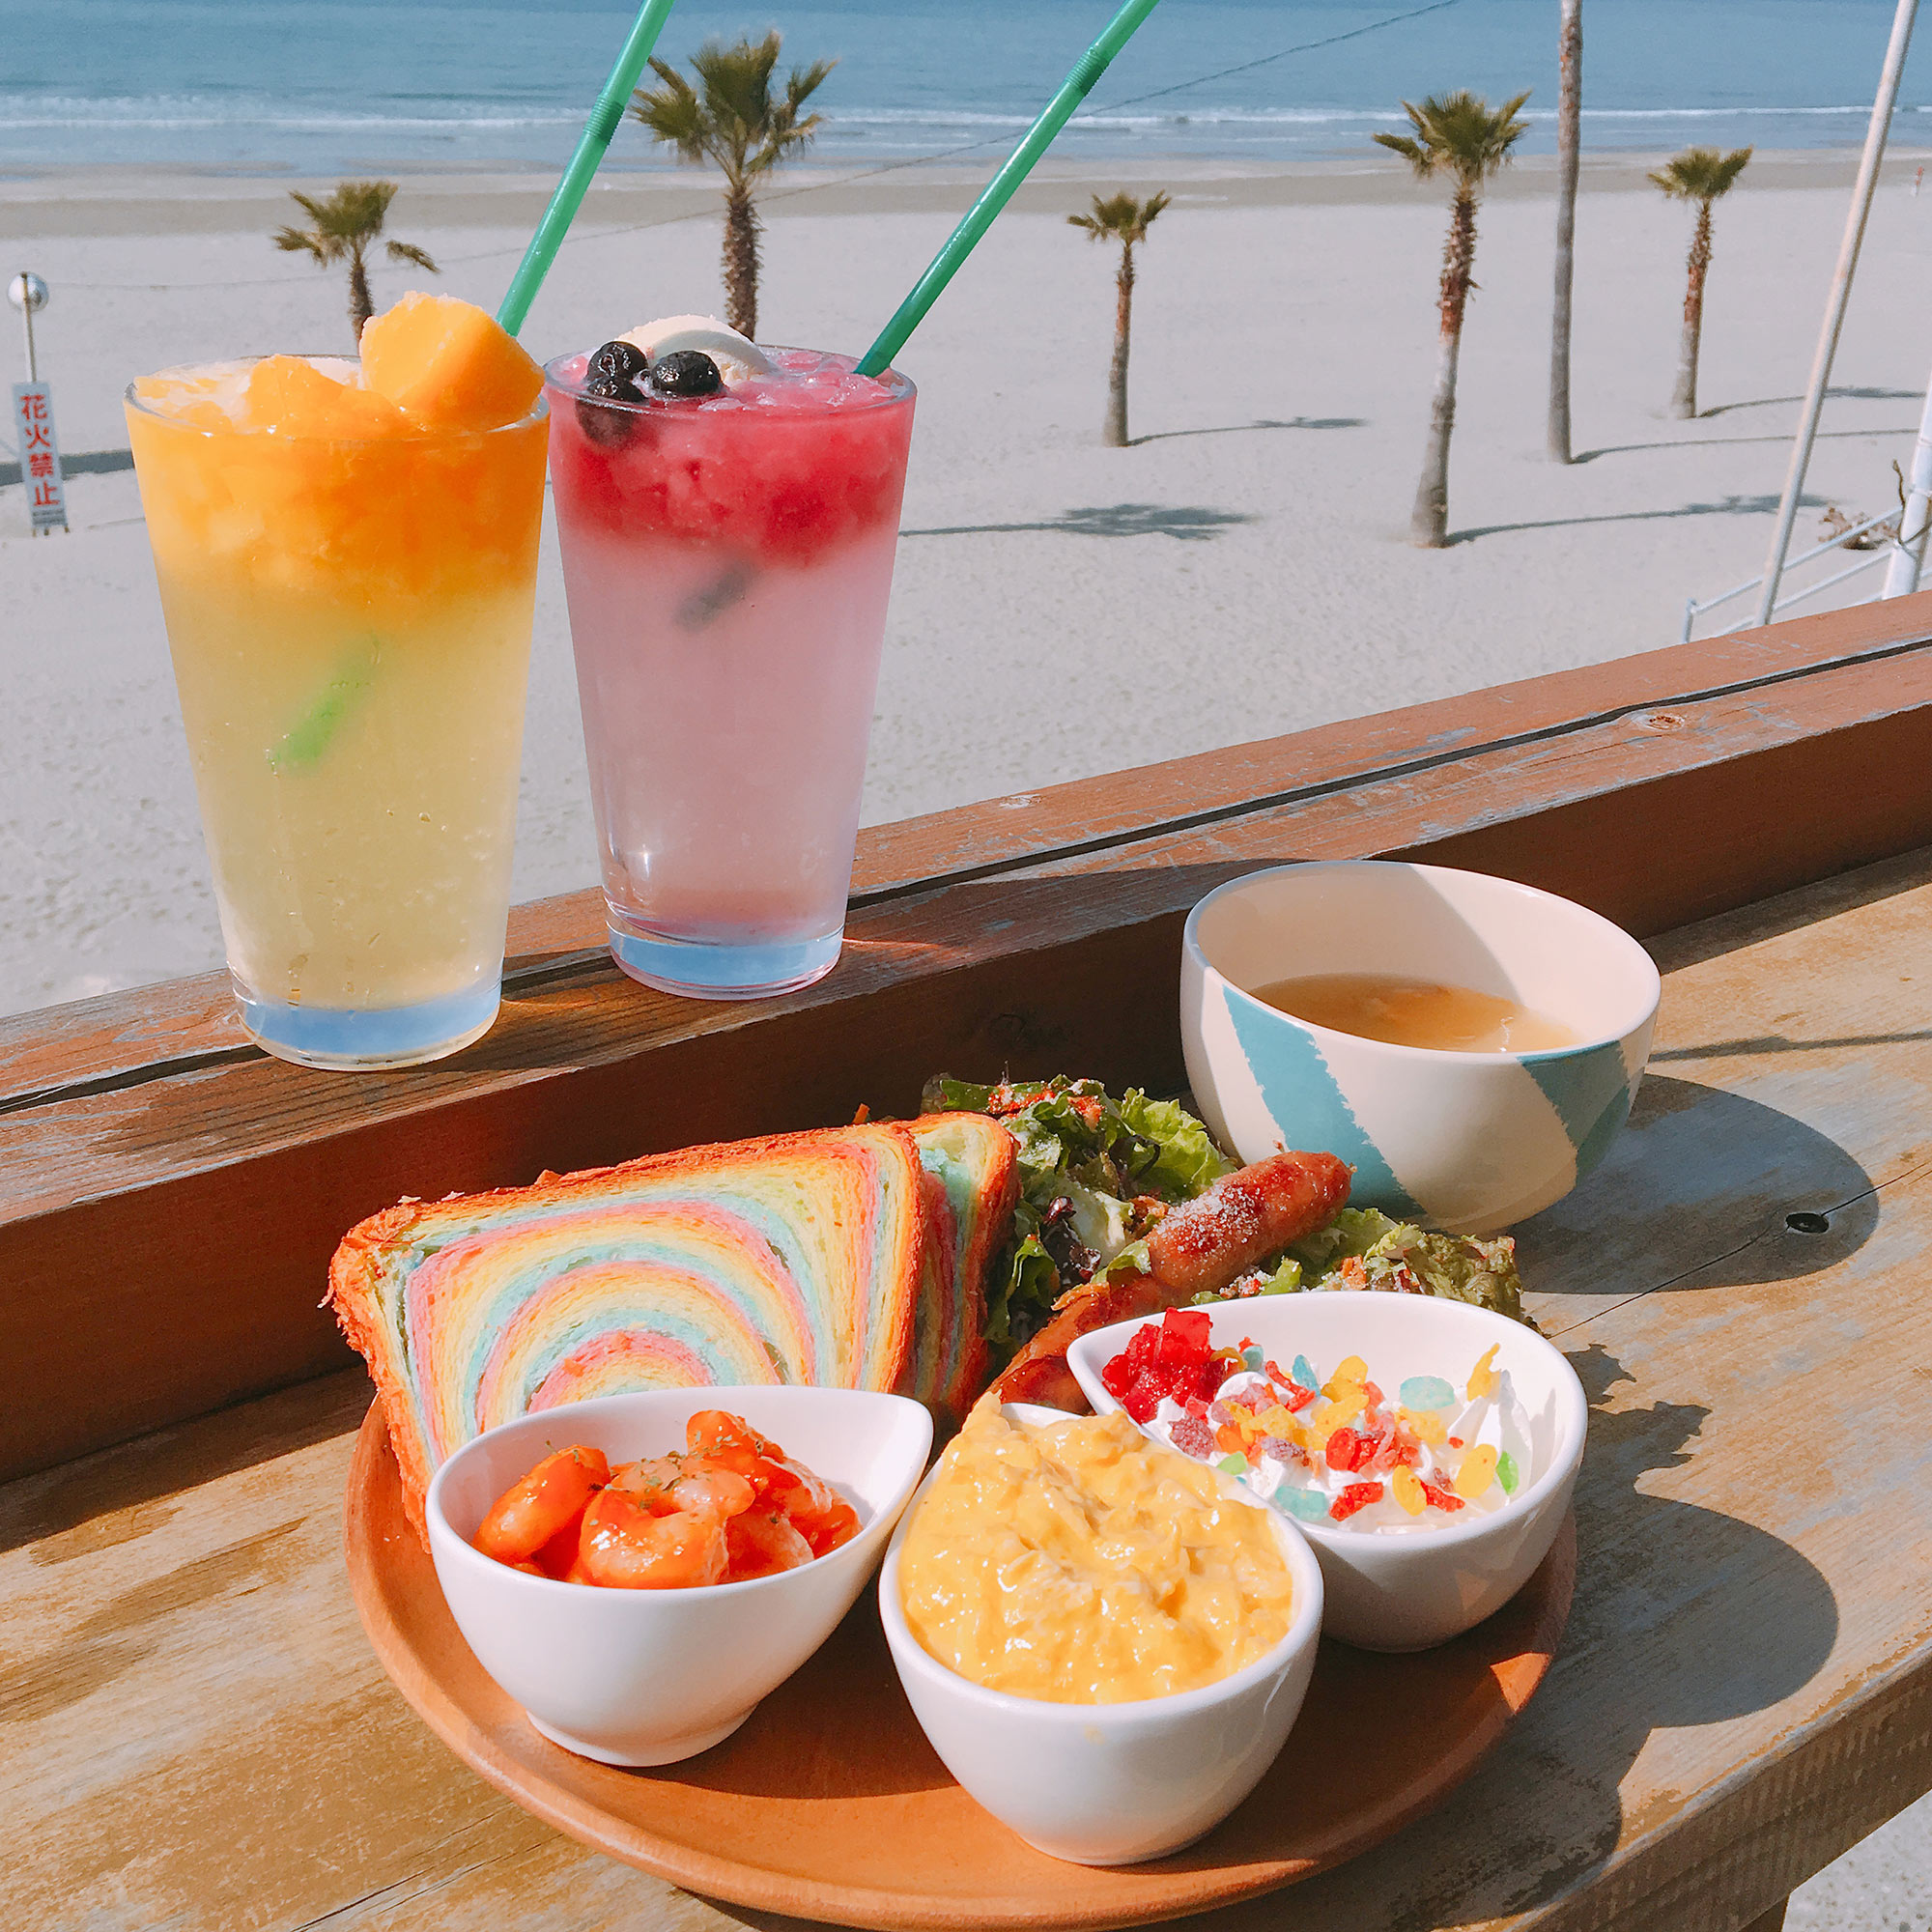 In front of the beach, with colorful bread and sodaの写真